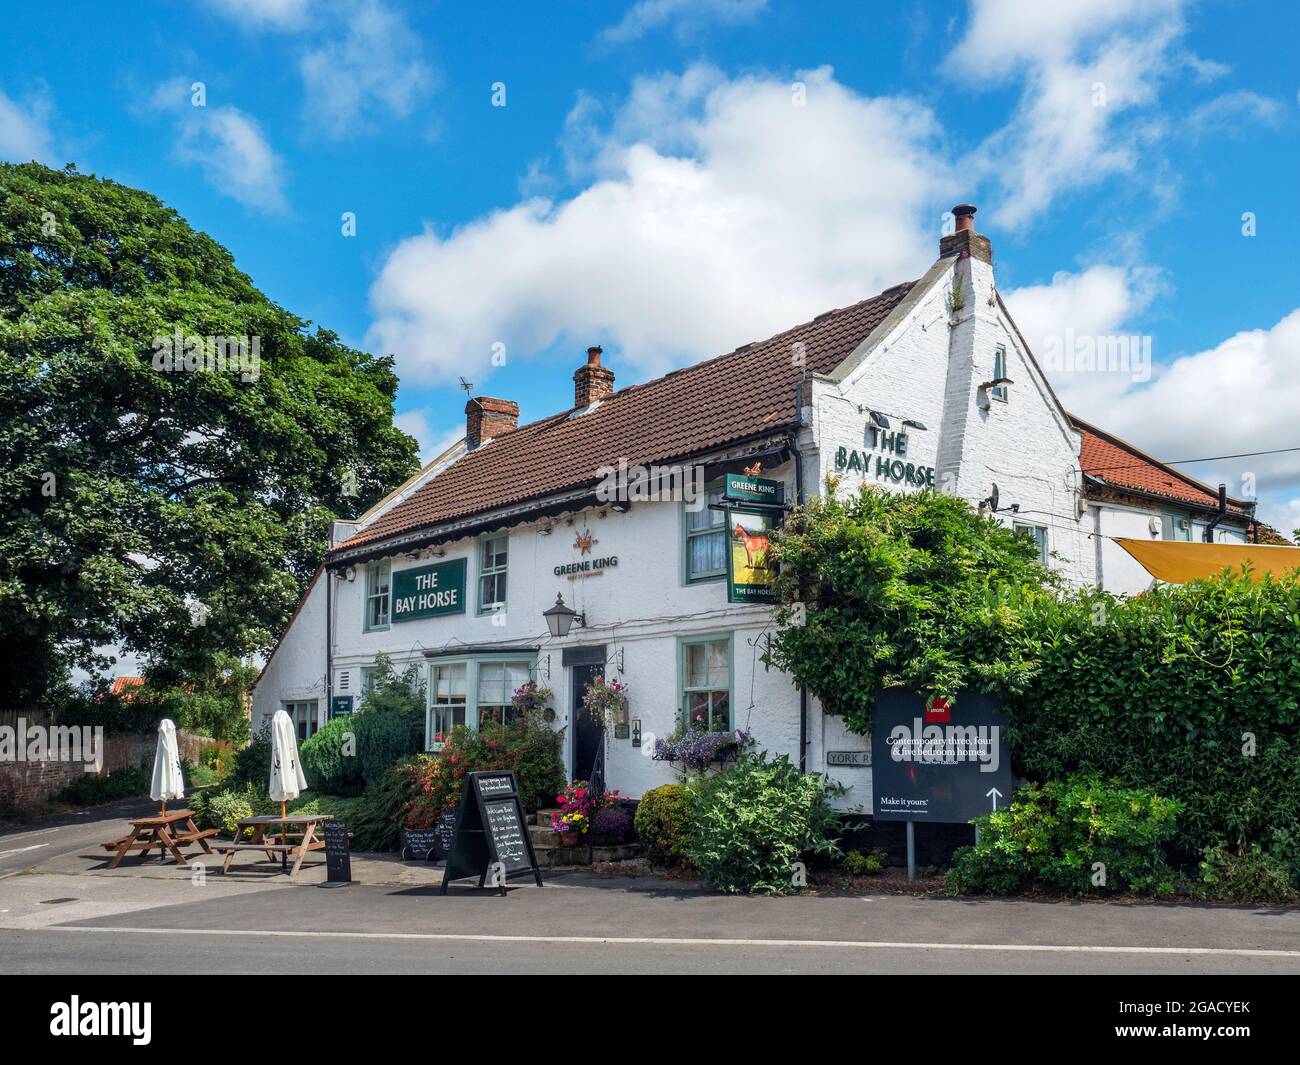 The Bay Horse a Greene King pub in the village of Green Hammerton North Yorkshire England Stock Photo